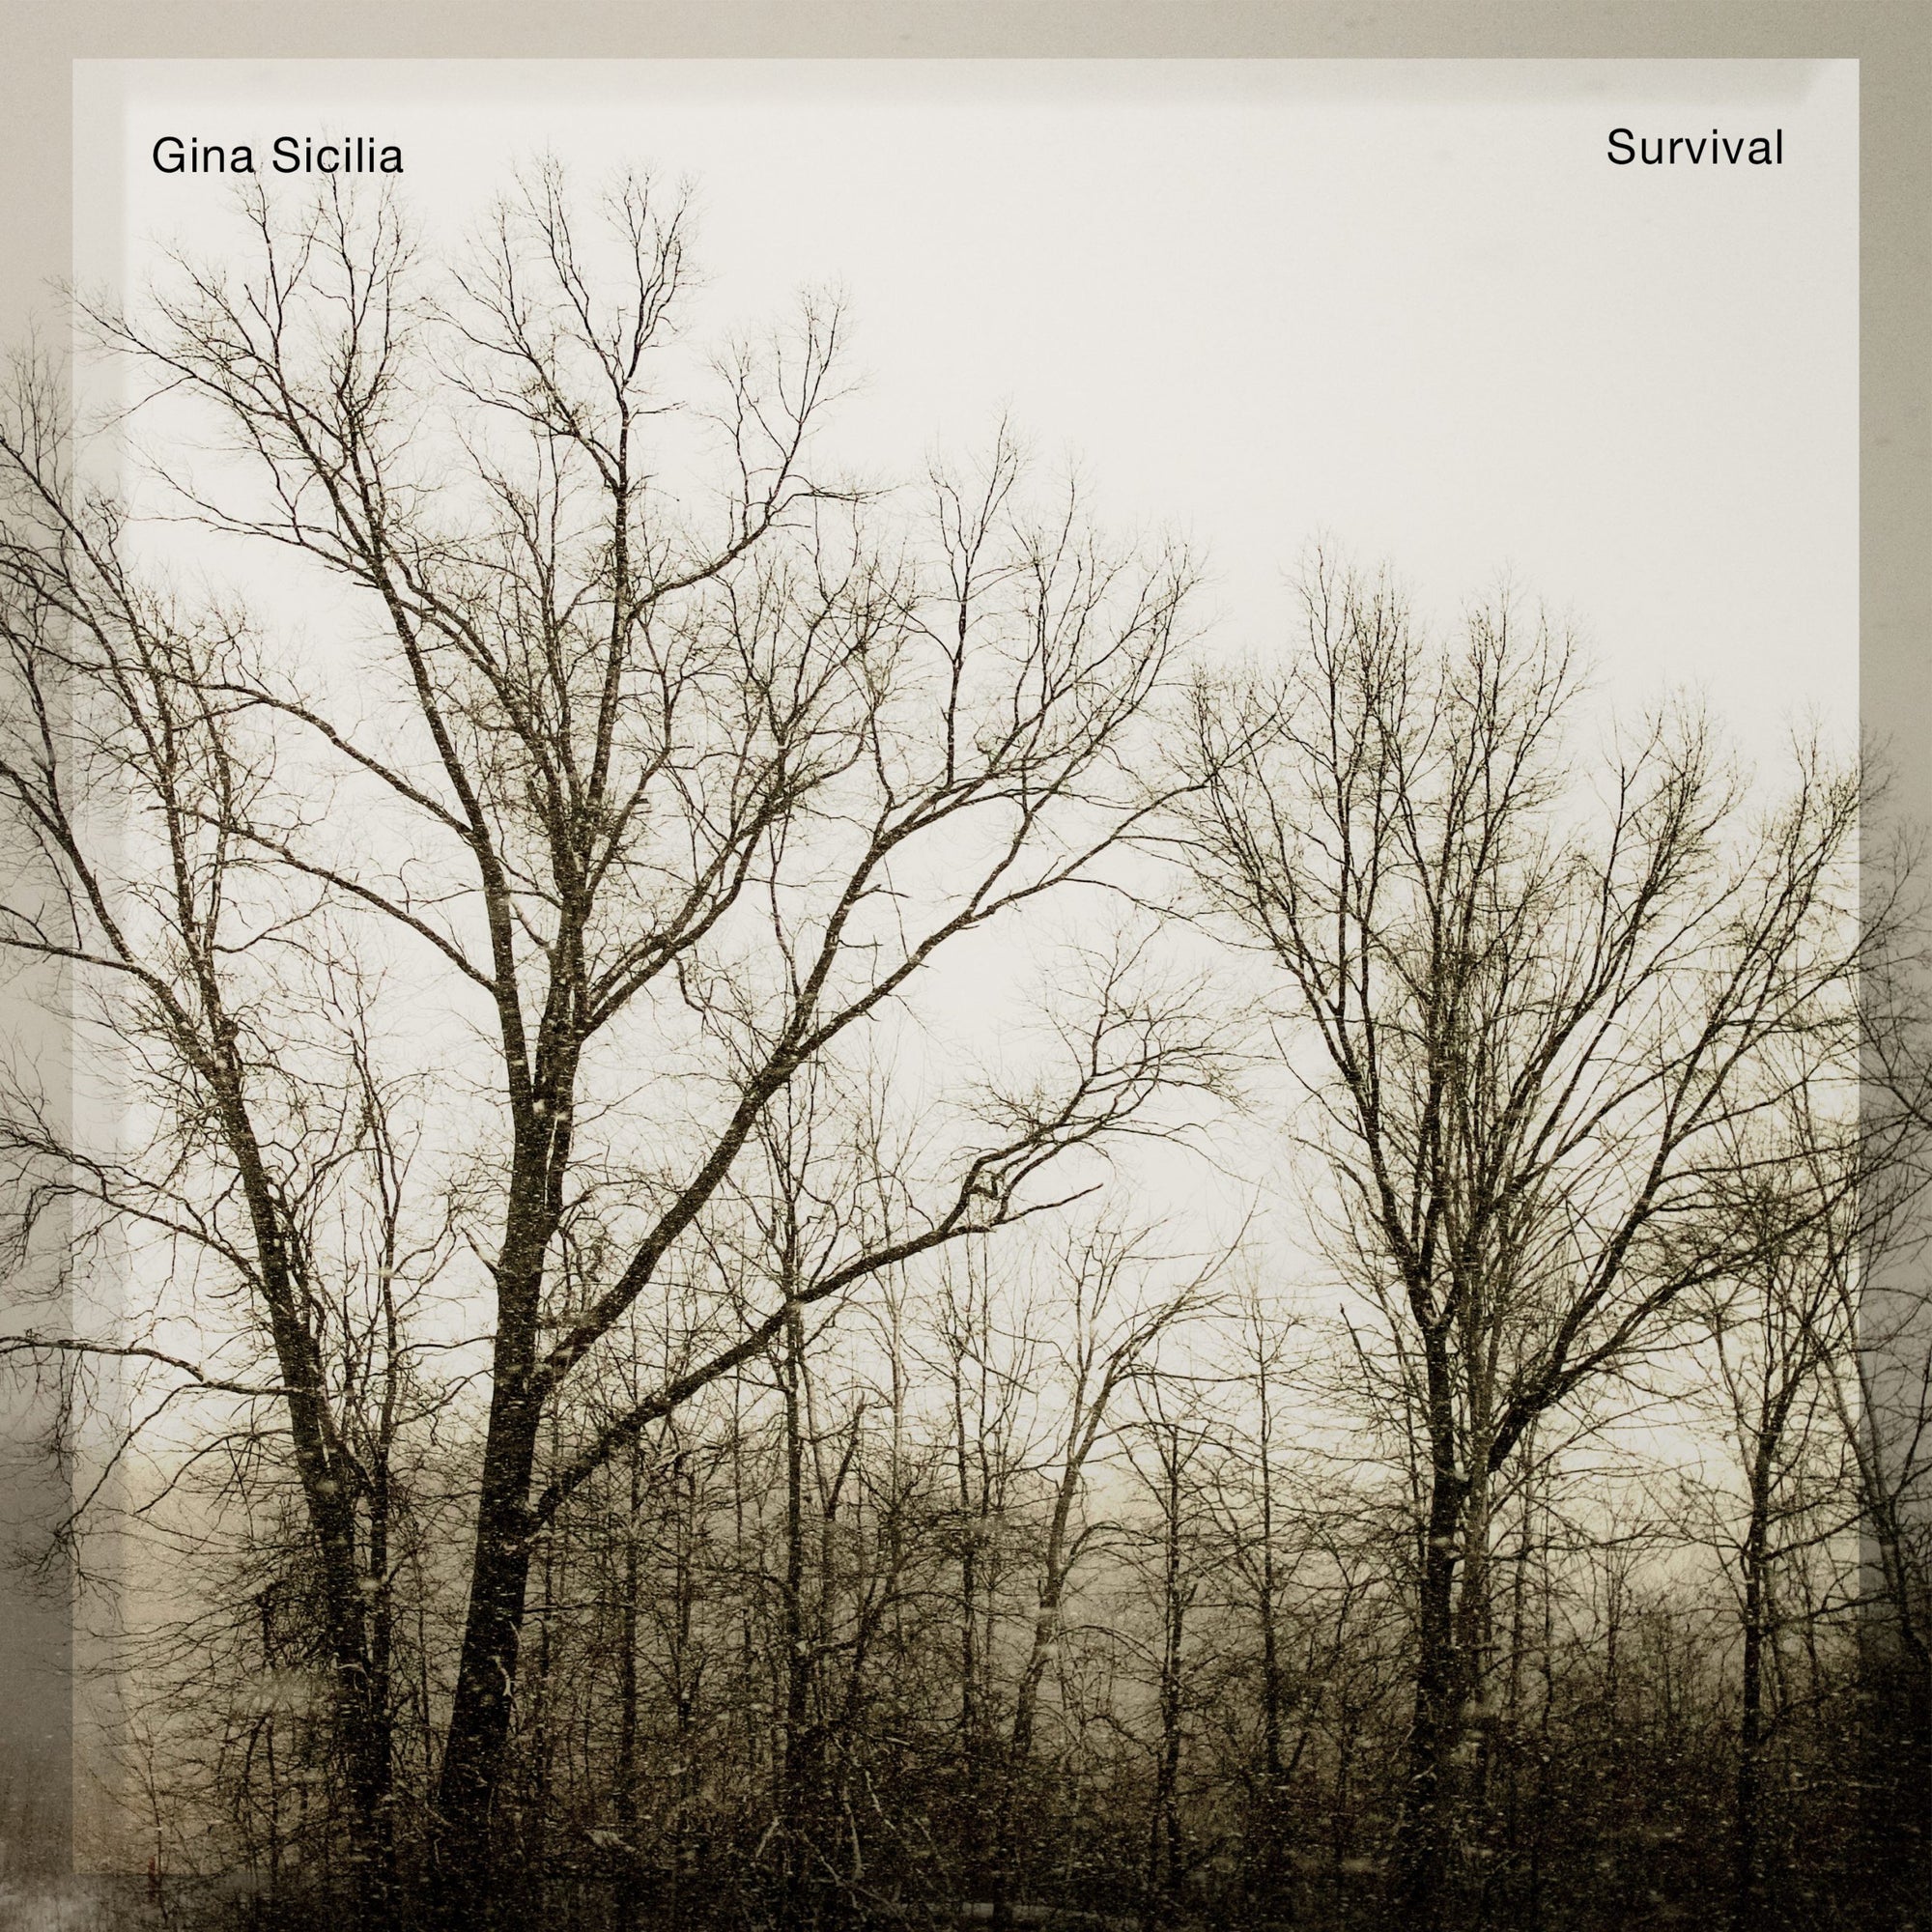 Gina Sicilia Adds Her Voice in Support of Gerry Beckley's Legacy With "Survival"